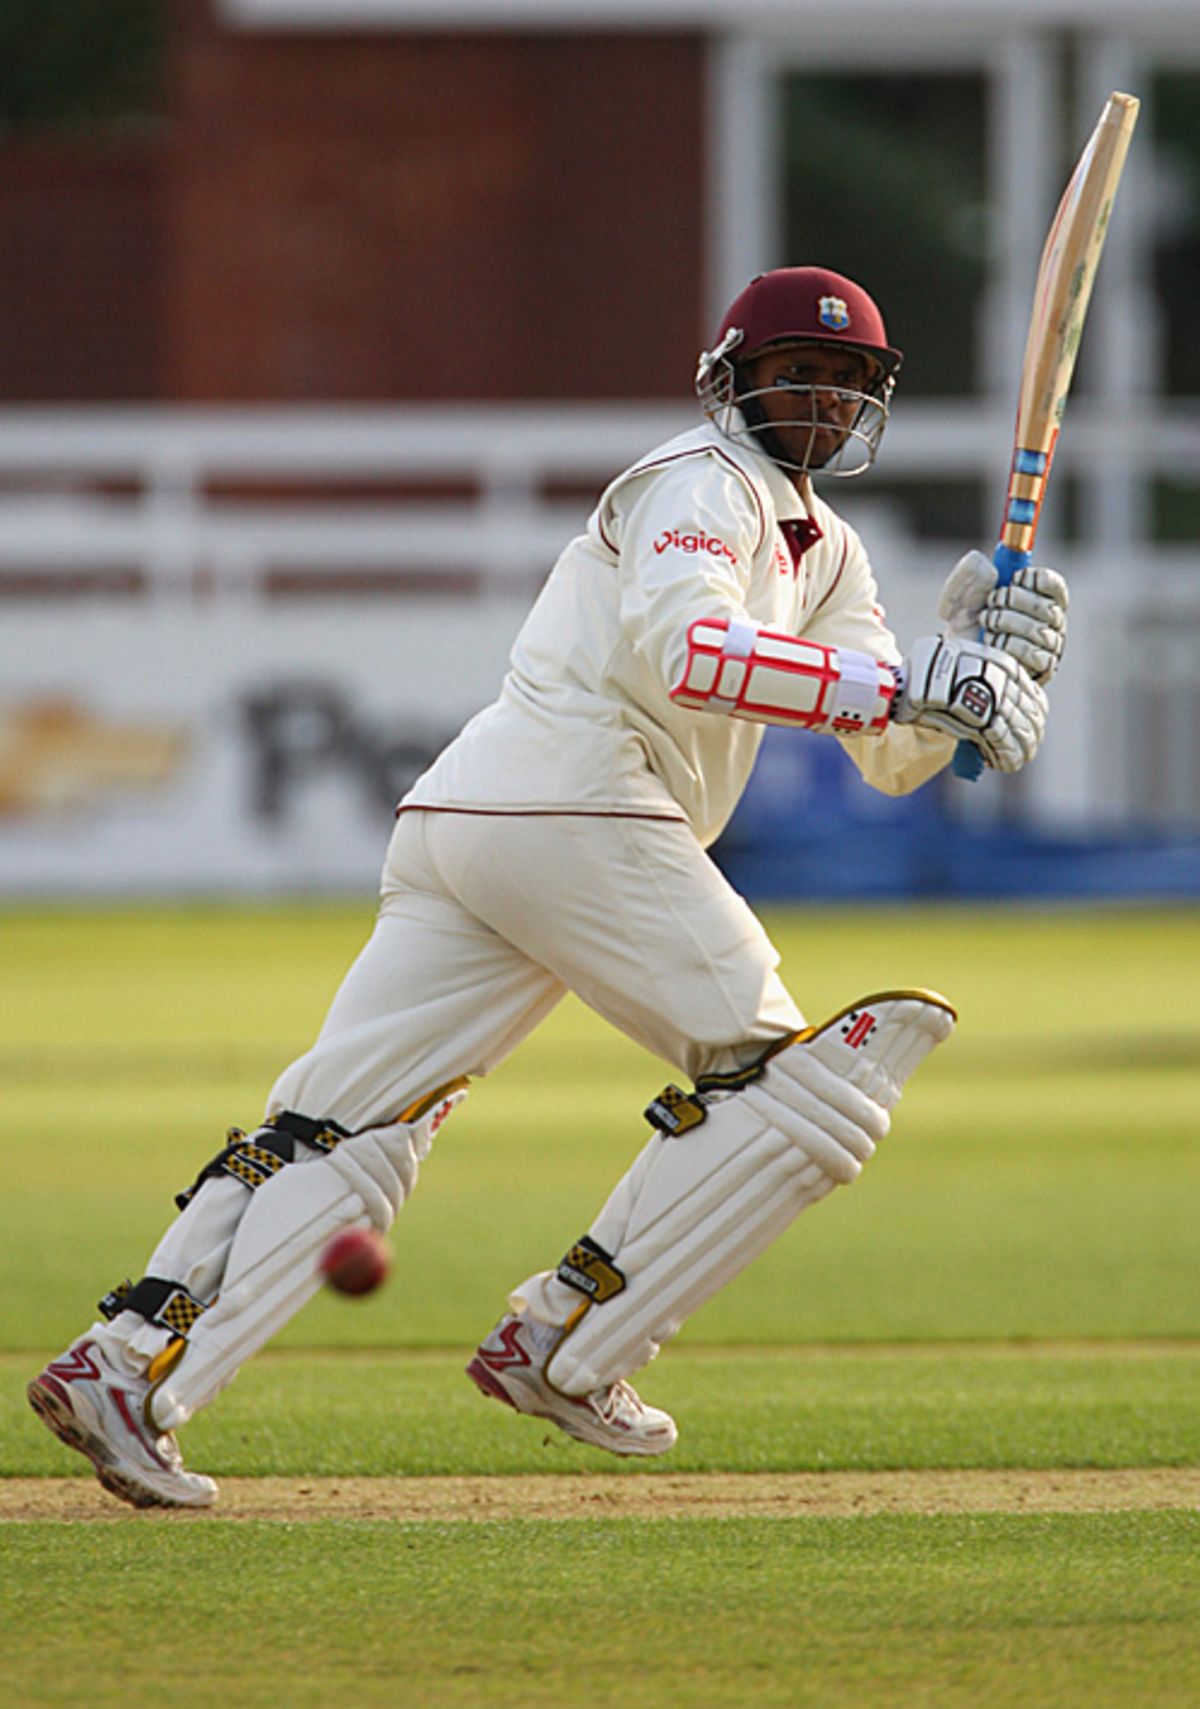 Shivnarine Chanderpaul tickles one fine during a difficult day for West Indies, England Lions v West Indians, Derby, April 30, 2009